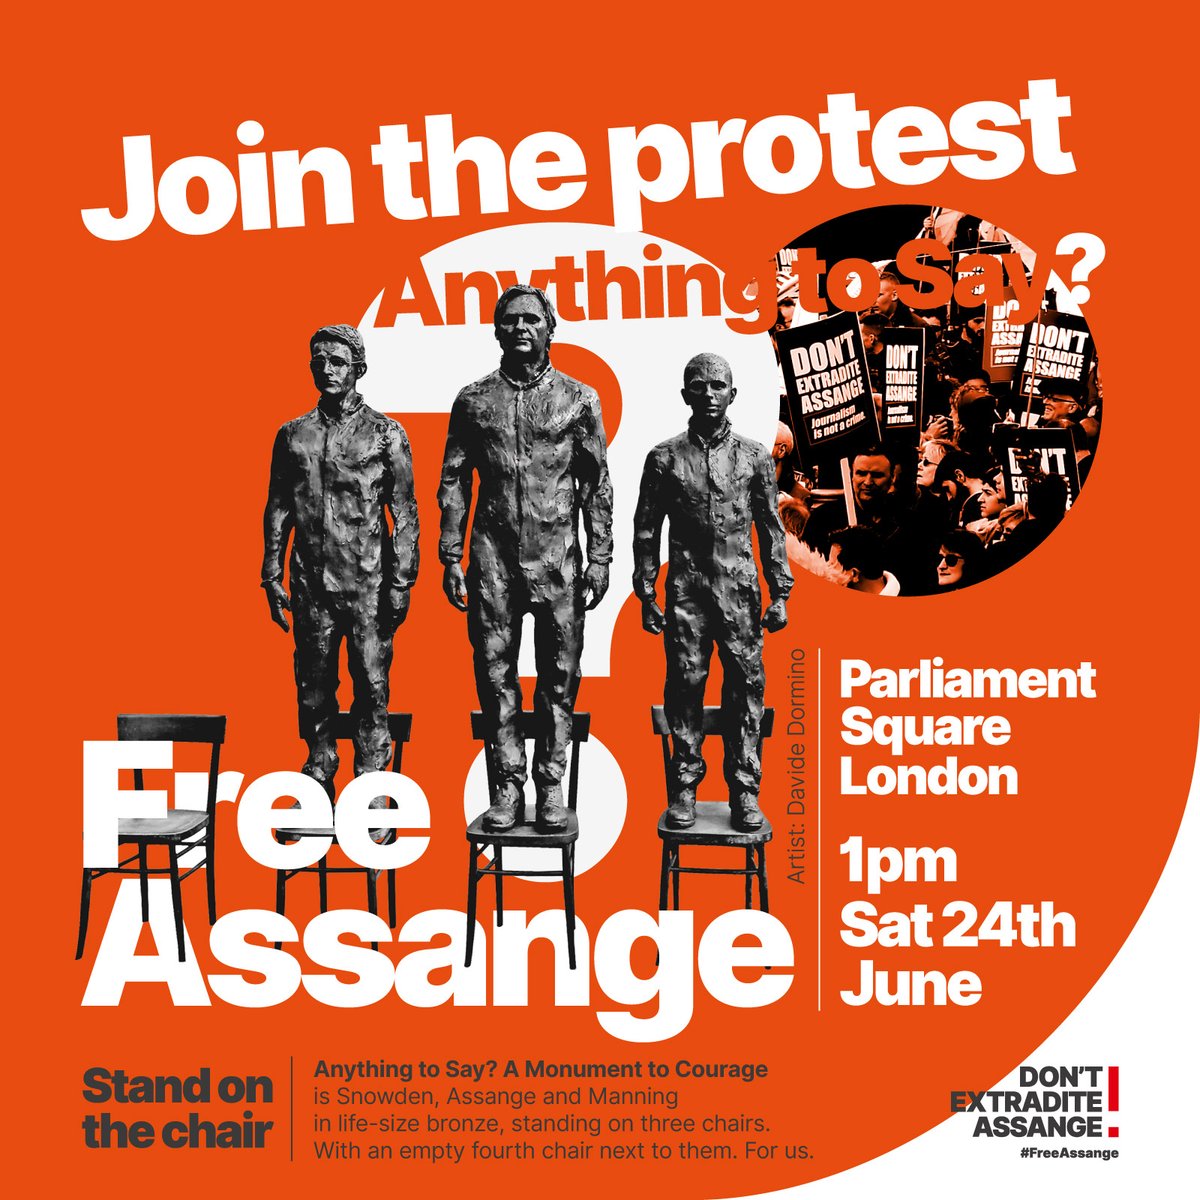 Join us in Parliament Square on Saturday 24th June to have your say! | @AnythingtoSay_ 
#FreeAssangeNOW #DropTheCharges

dontextraditeassange.com/events/join-th…